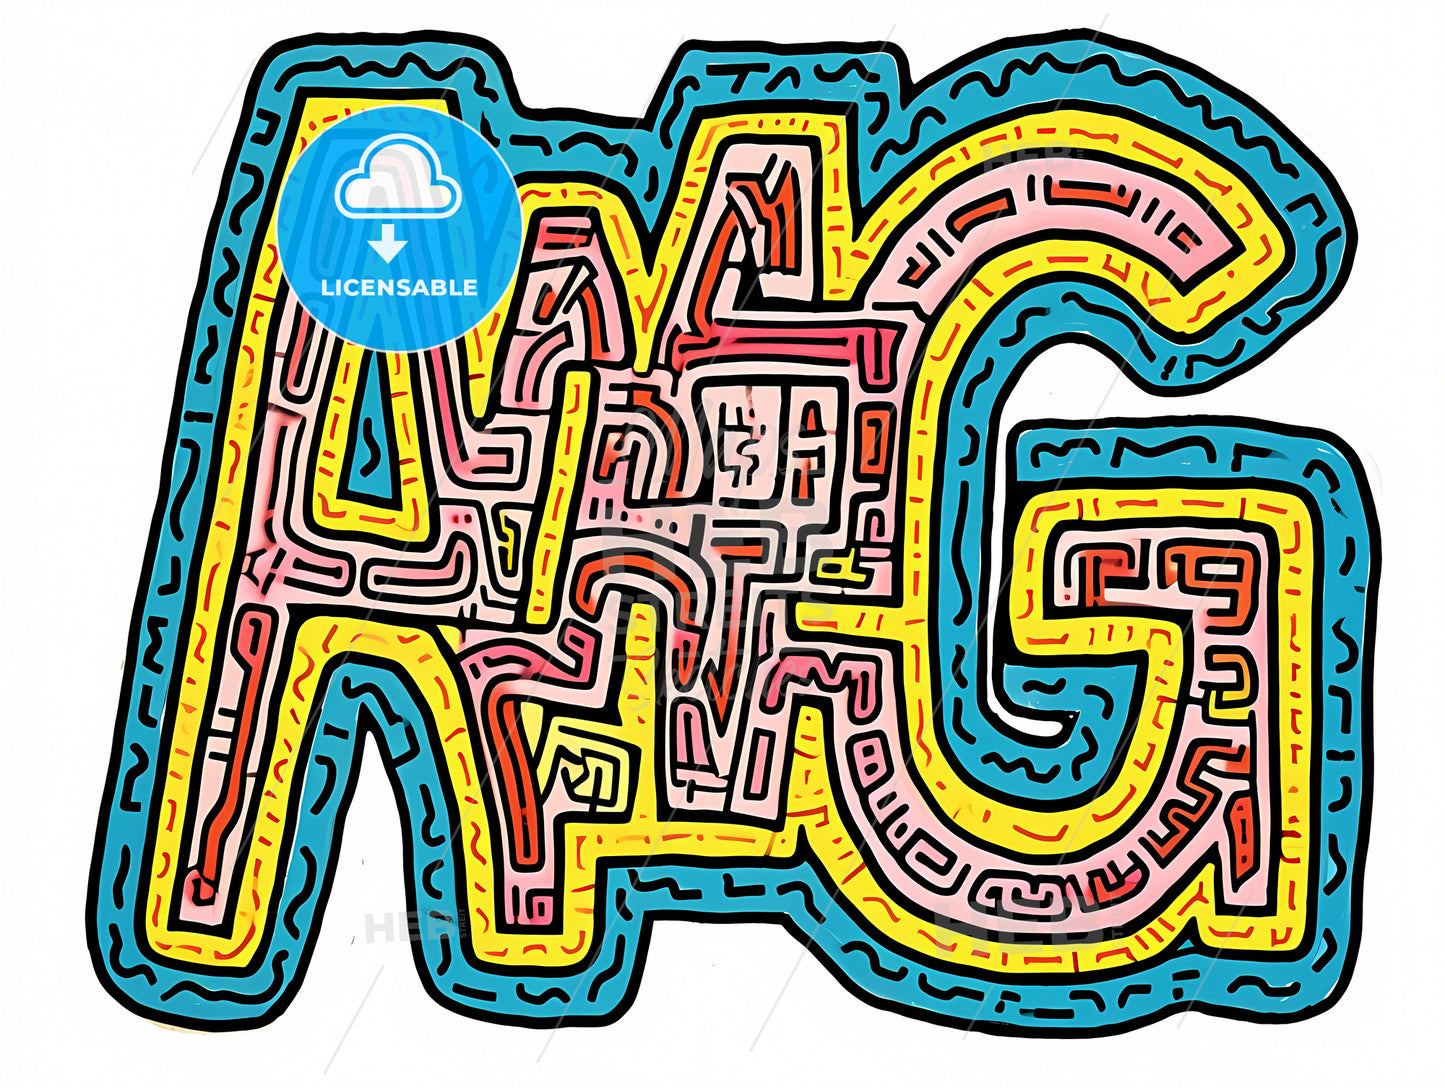 Large Letters A M G, A Maze With Different Colored Lines